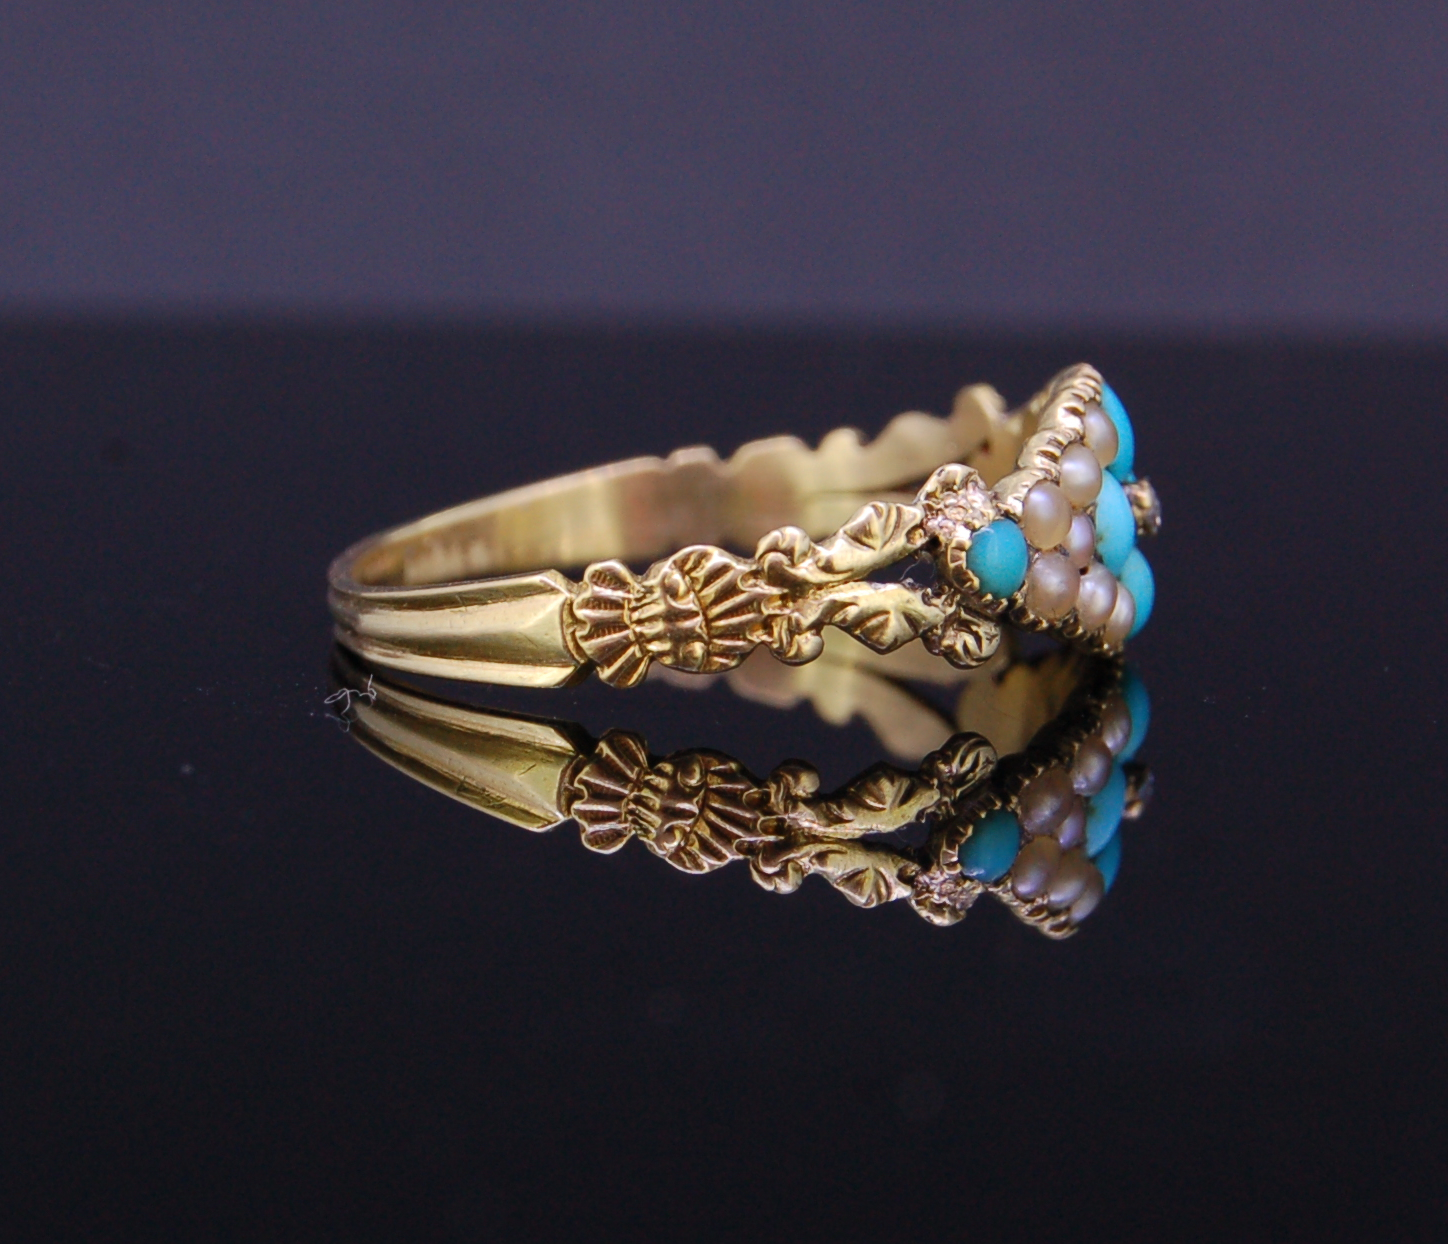 ANTIQUE TURQOISE AND PEARL RING - Image 3 of 3